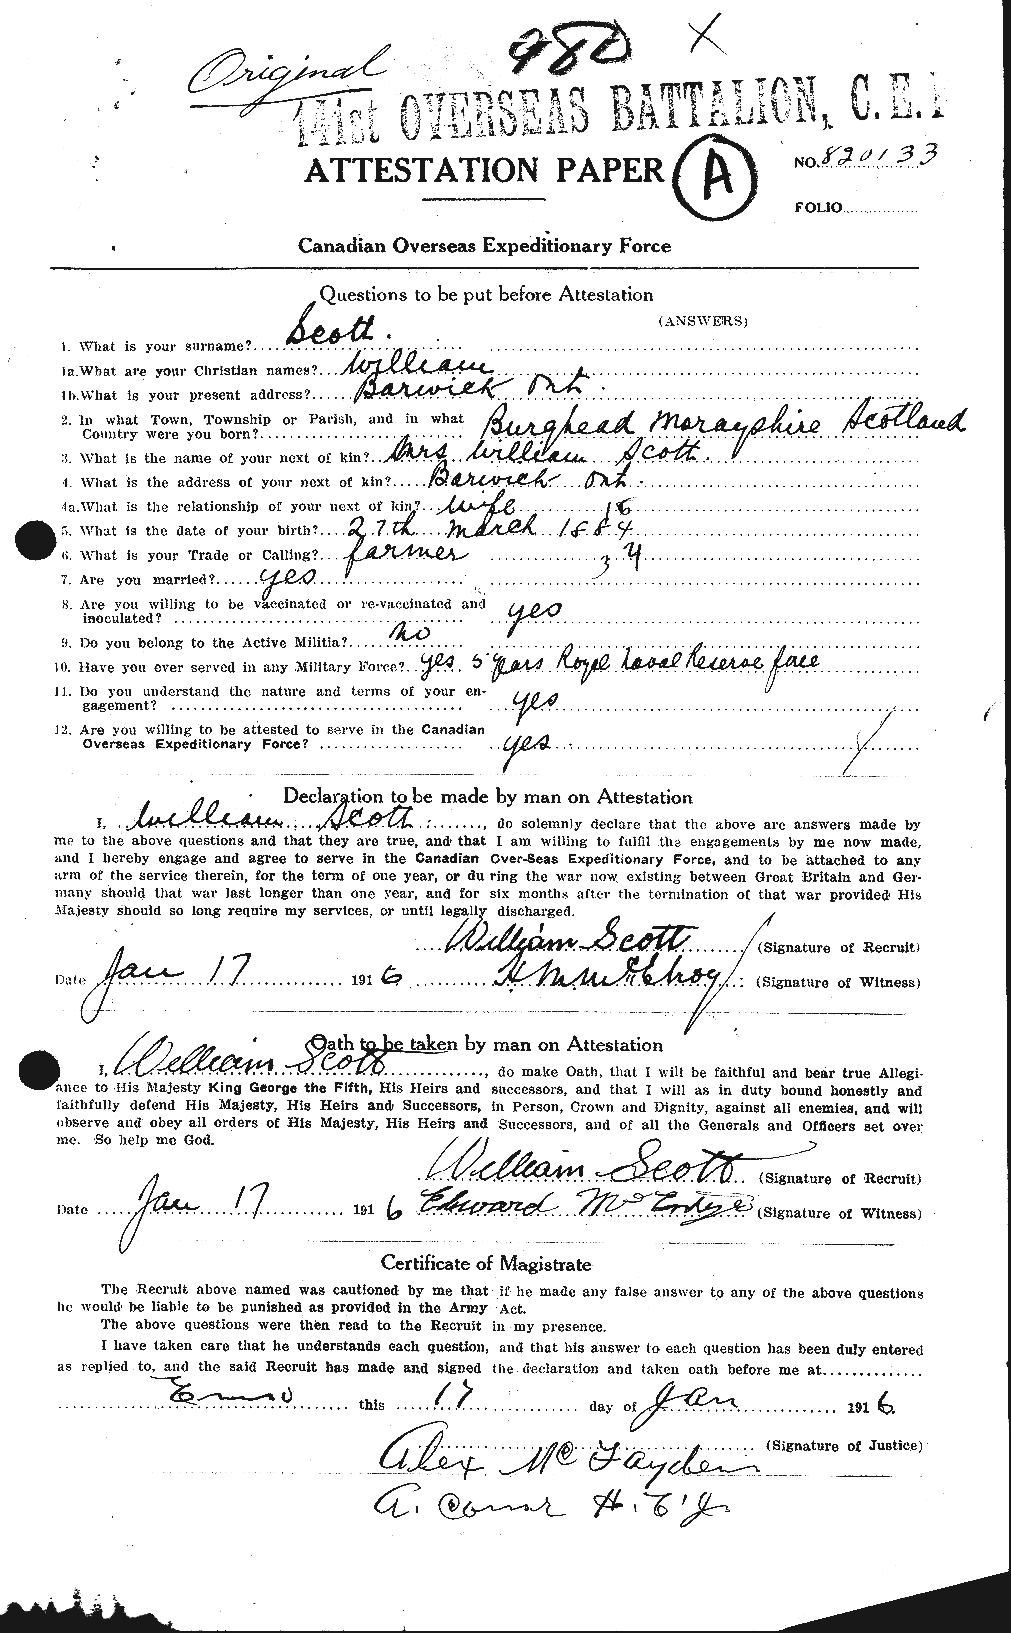 Personnel Records of the First World War - CEF 087647a